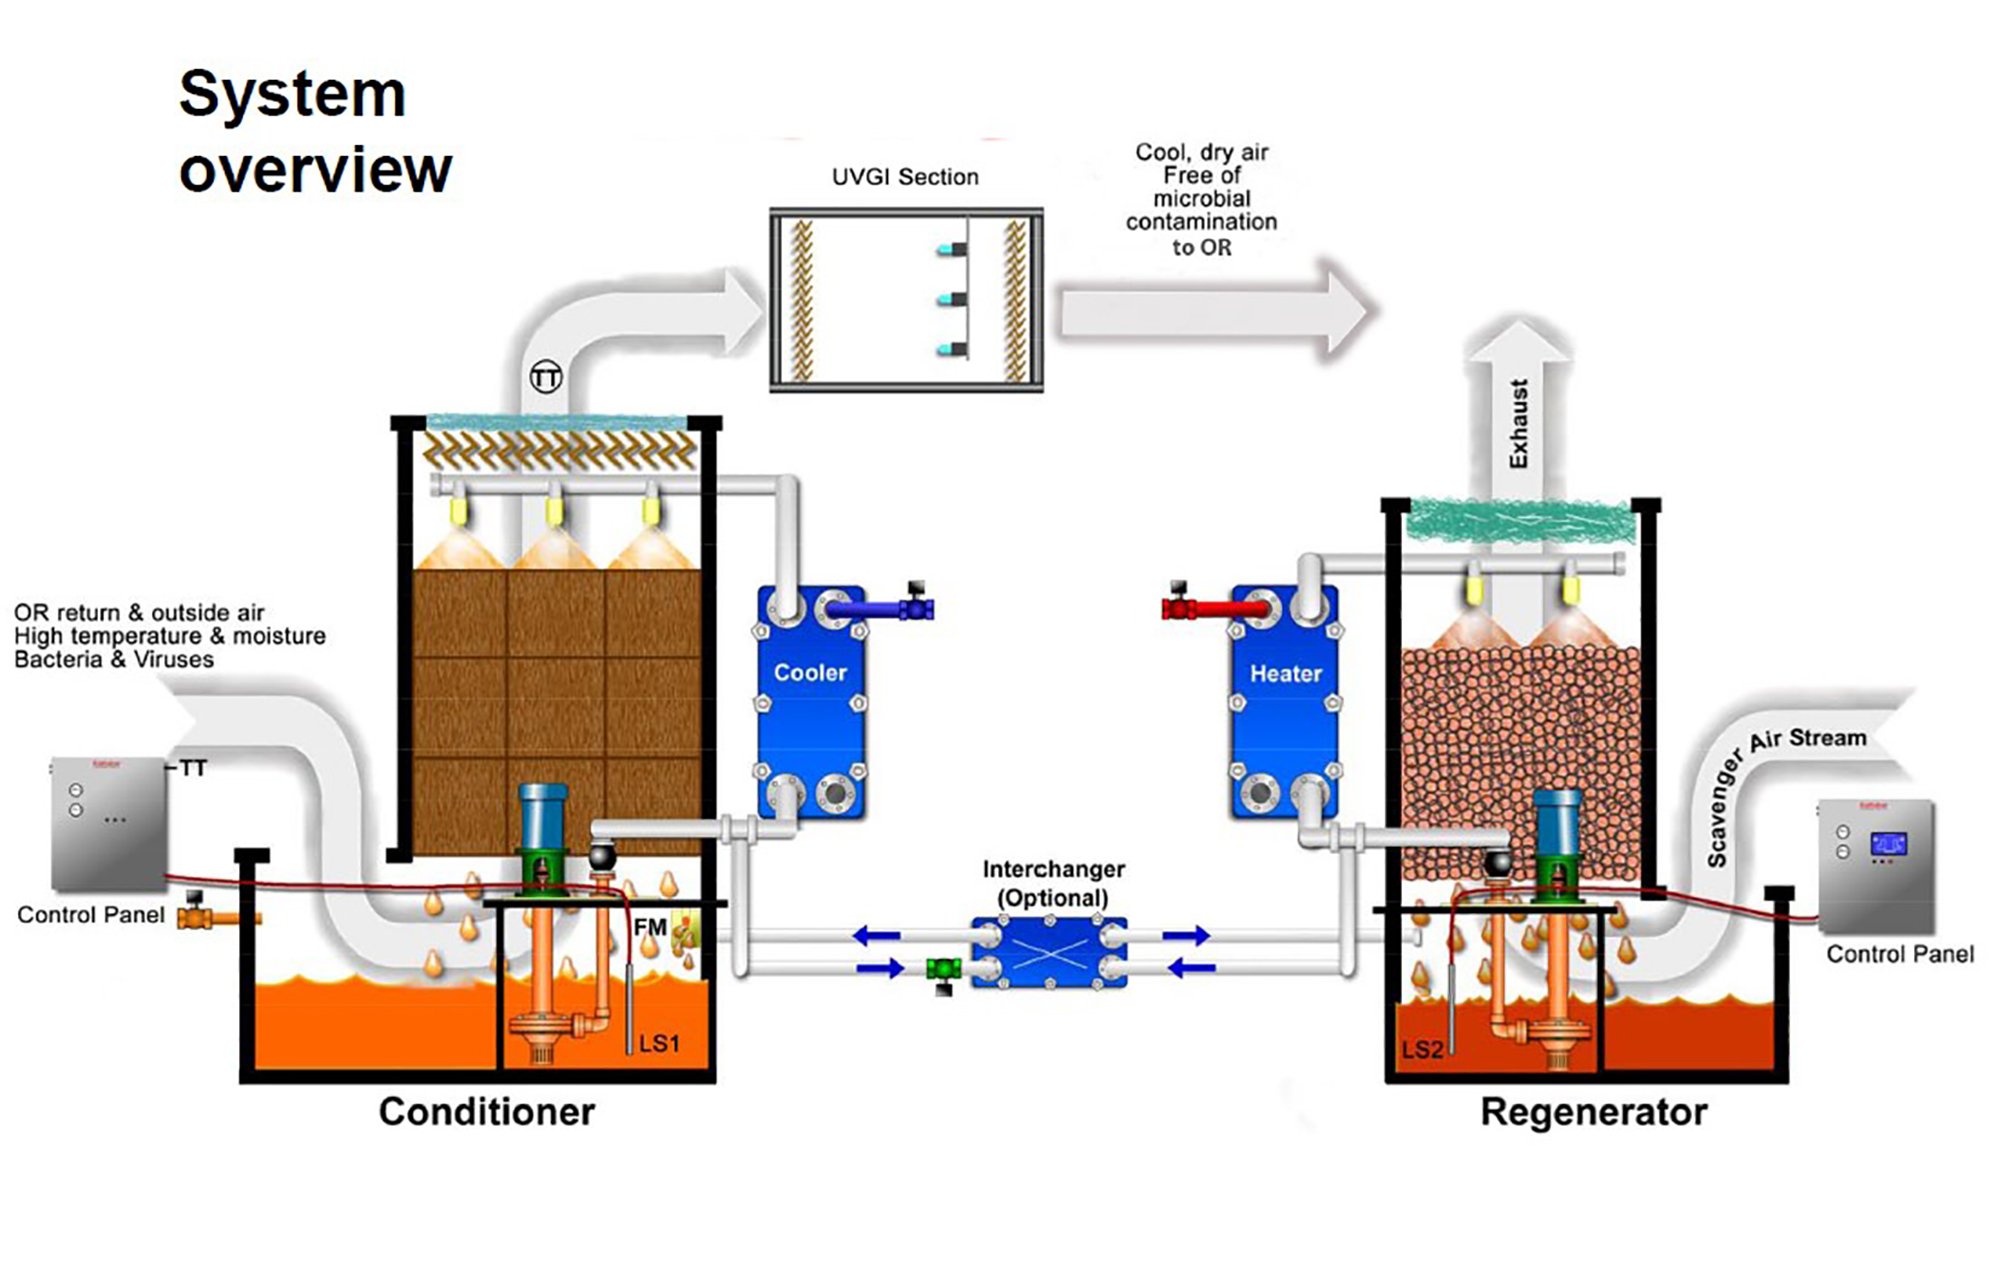 System overview image.jpg